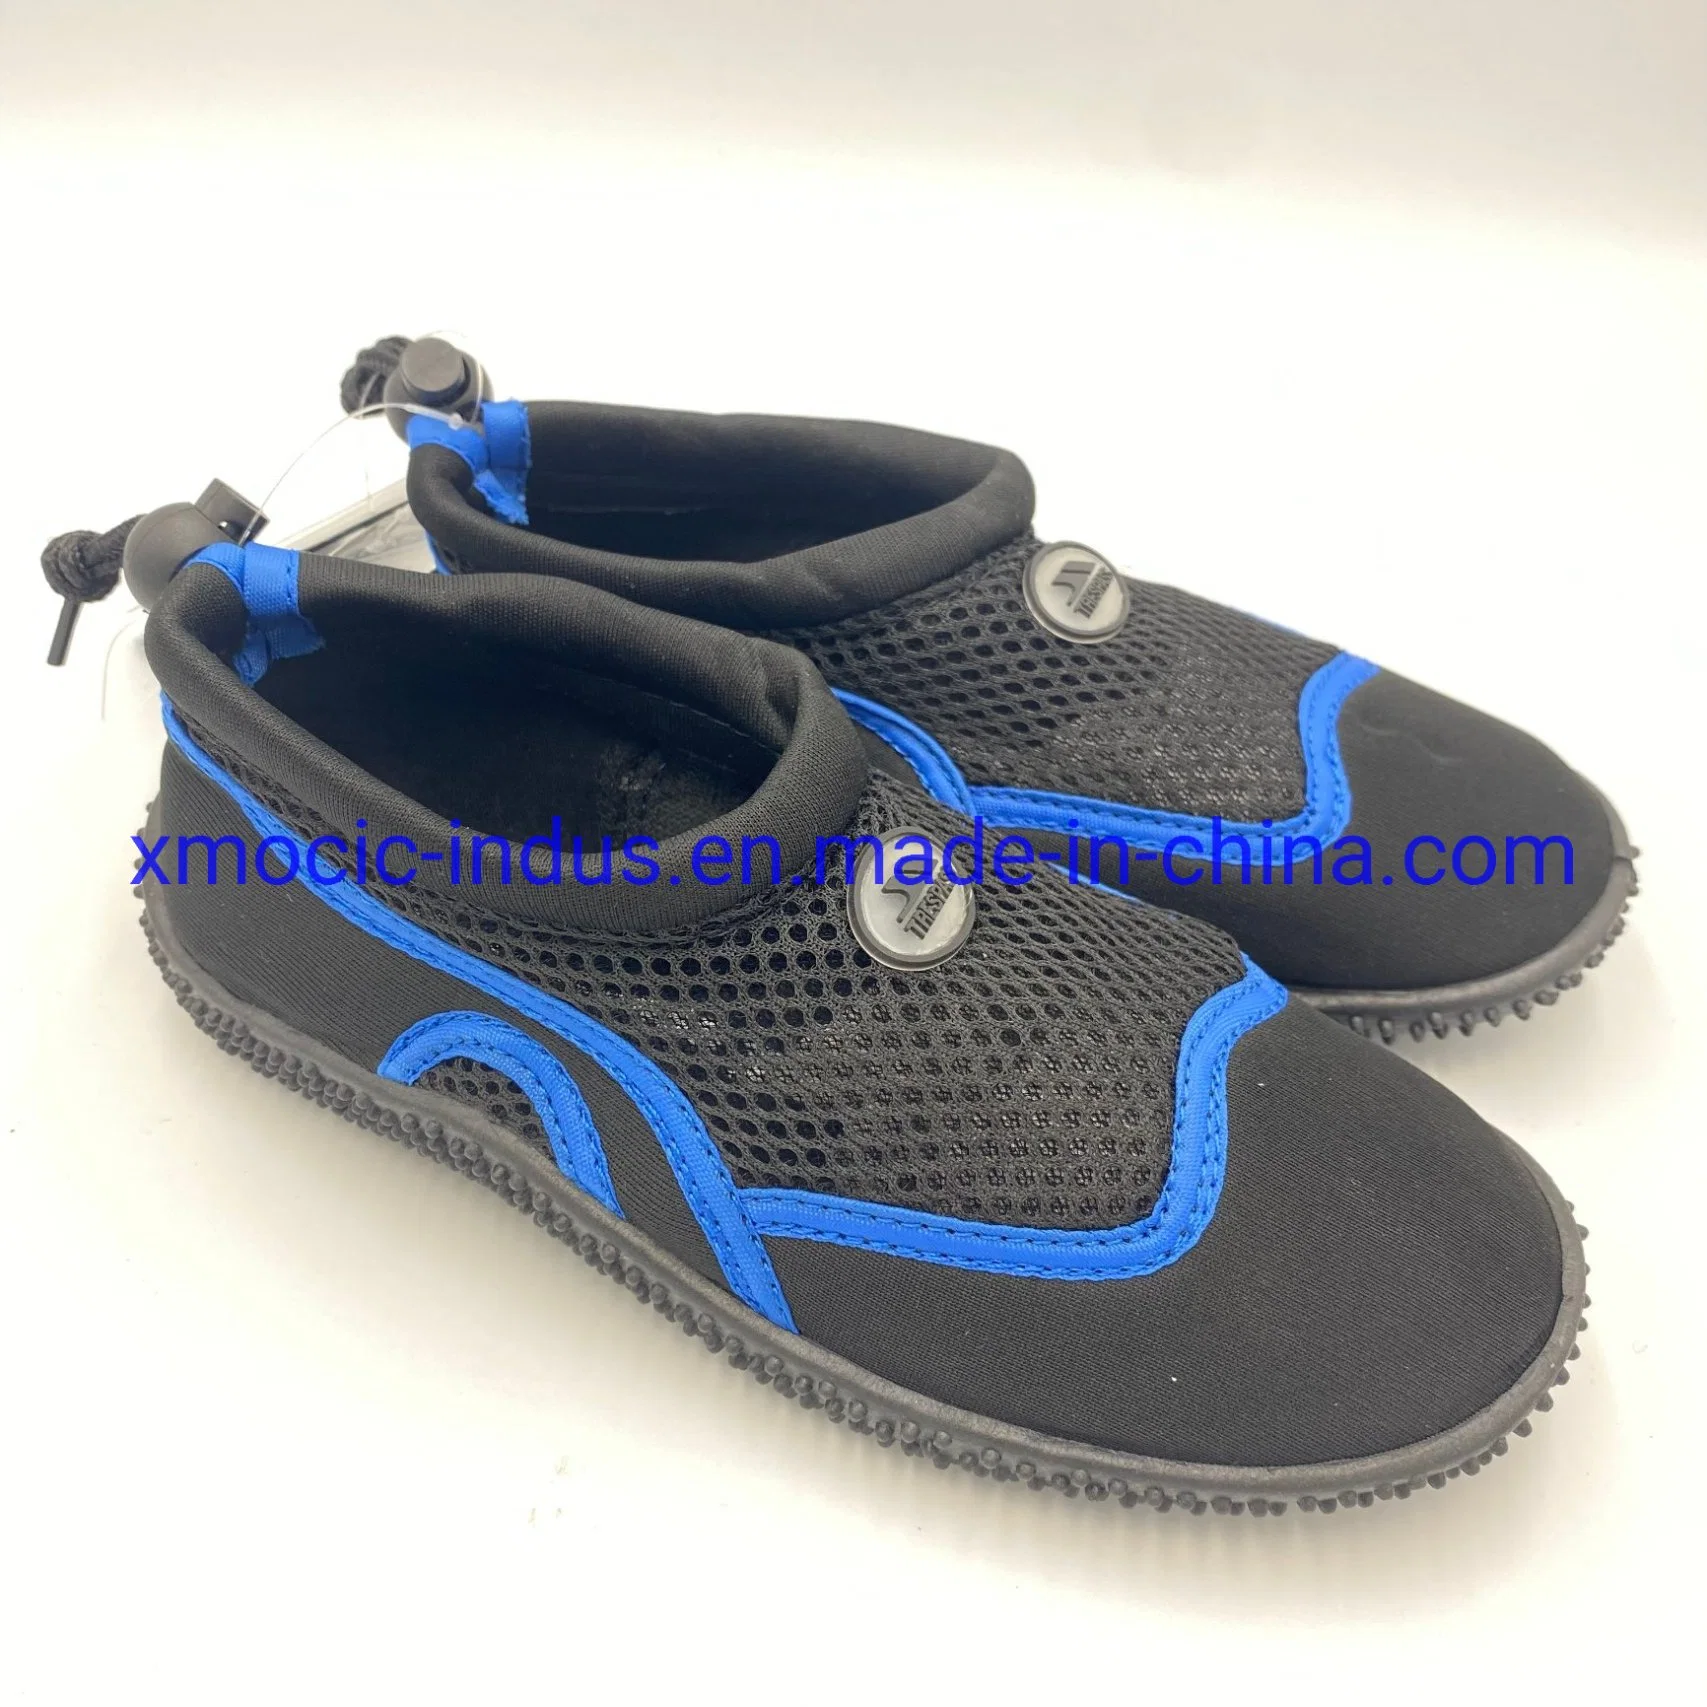 New Custom Swimming Rubber Aqua Shoes Breathable Soft Barefoot Outdoor Beach Nonslip Fitness Diving Sneaker Surf Shoes